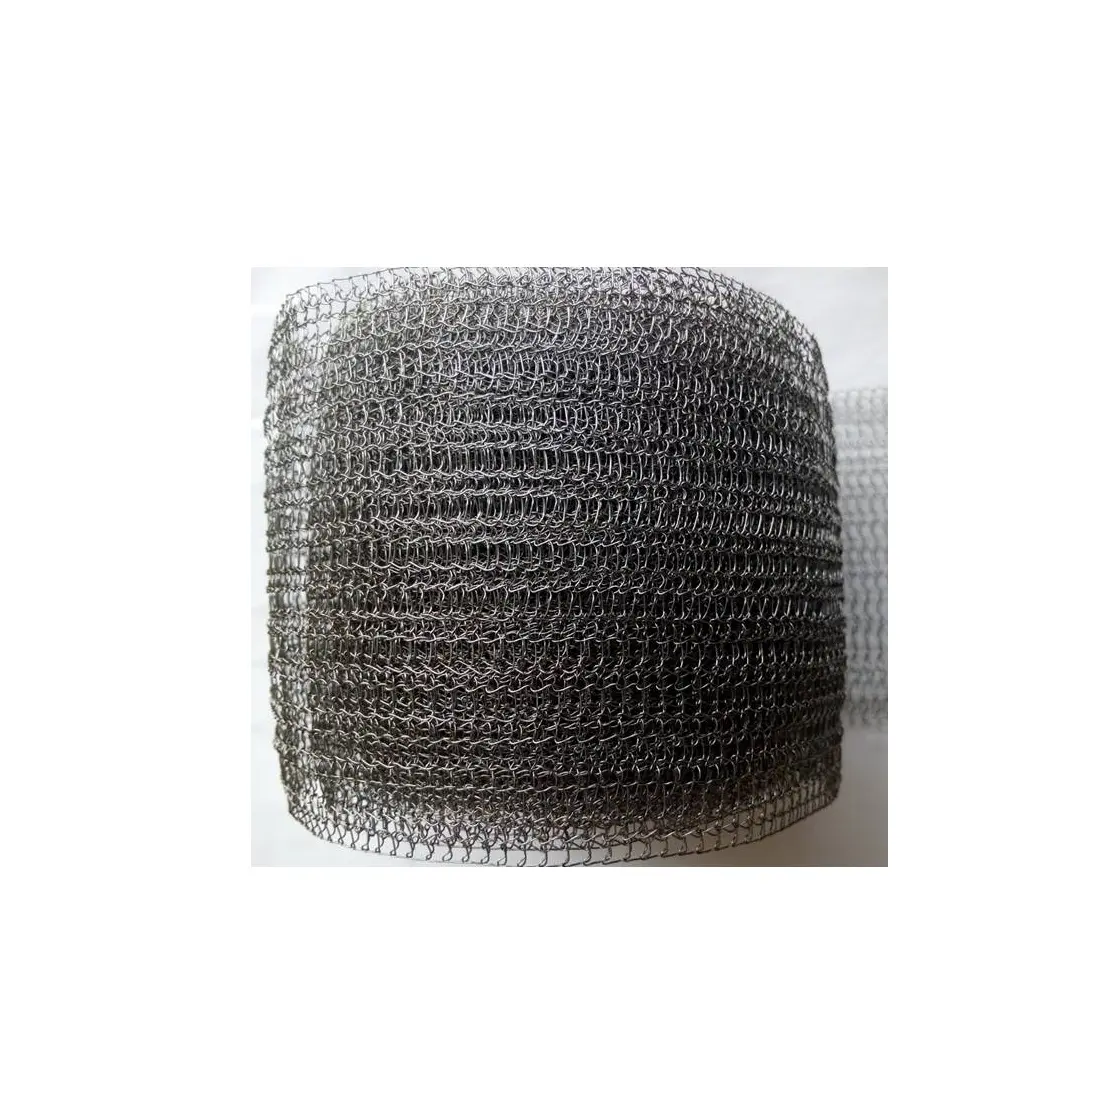 Hot Selling Flexible Durable Wire Mesh Rolls Steel Wire Mesh for Industrial Use Attainable at Best Price from India